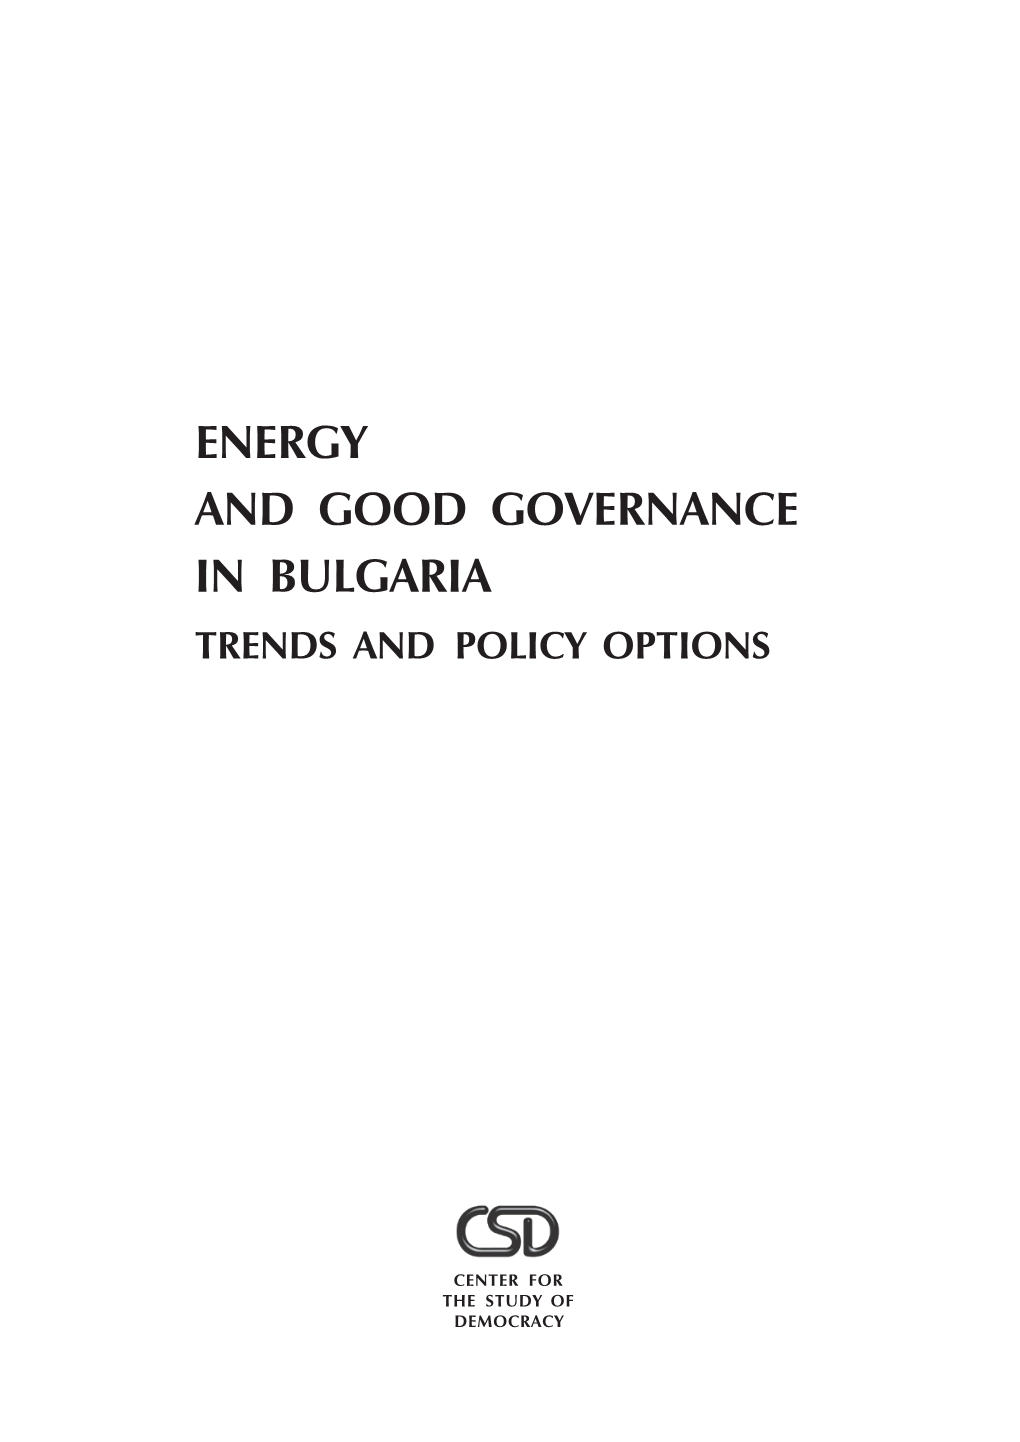 Energy and Good Governance in Bulgaria Trends and Policy Options